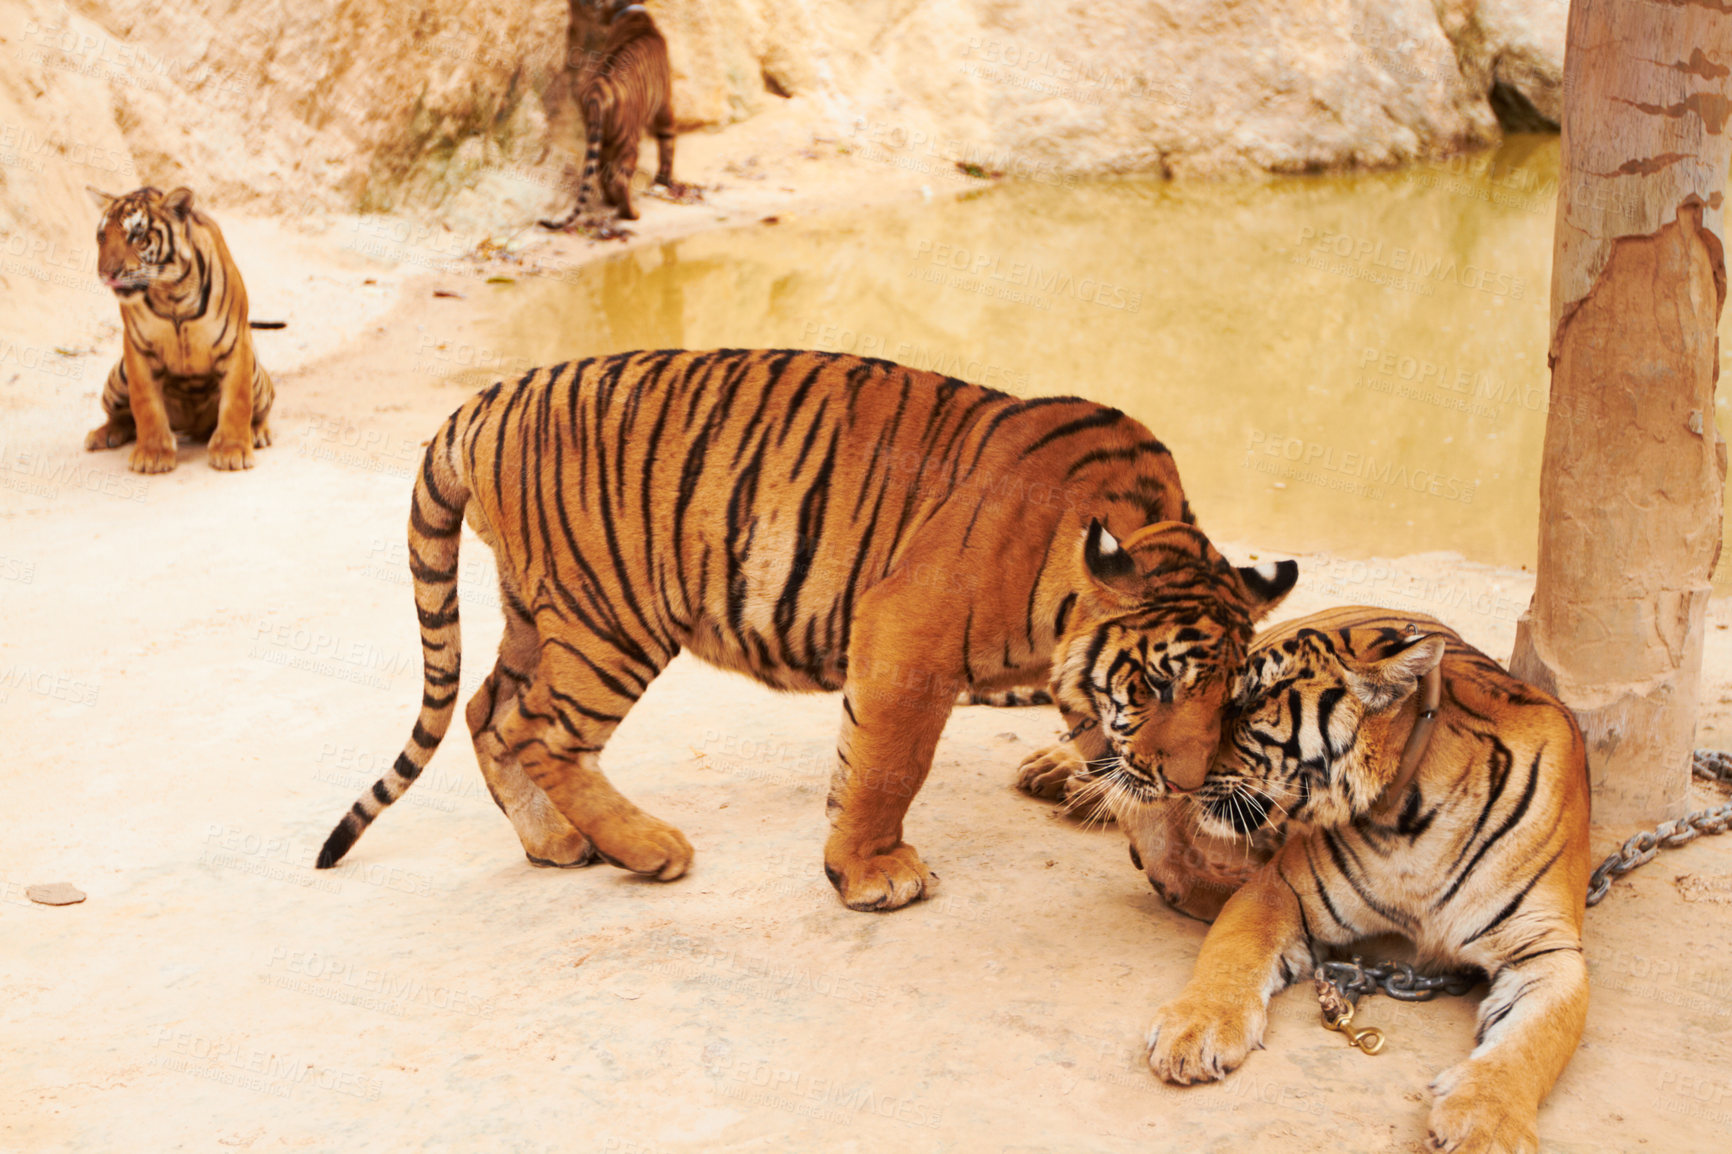 Buy stock photo Tigers playing on sand in nature by a zoo for majestic entertainment at a circus or habitat. Wildlife, wrestling and big cats exotic animals family fighting together in a desert or dune conservation.